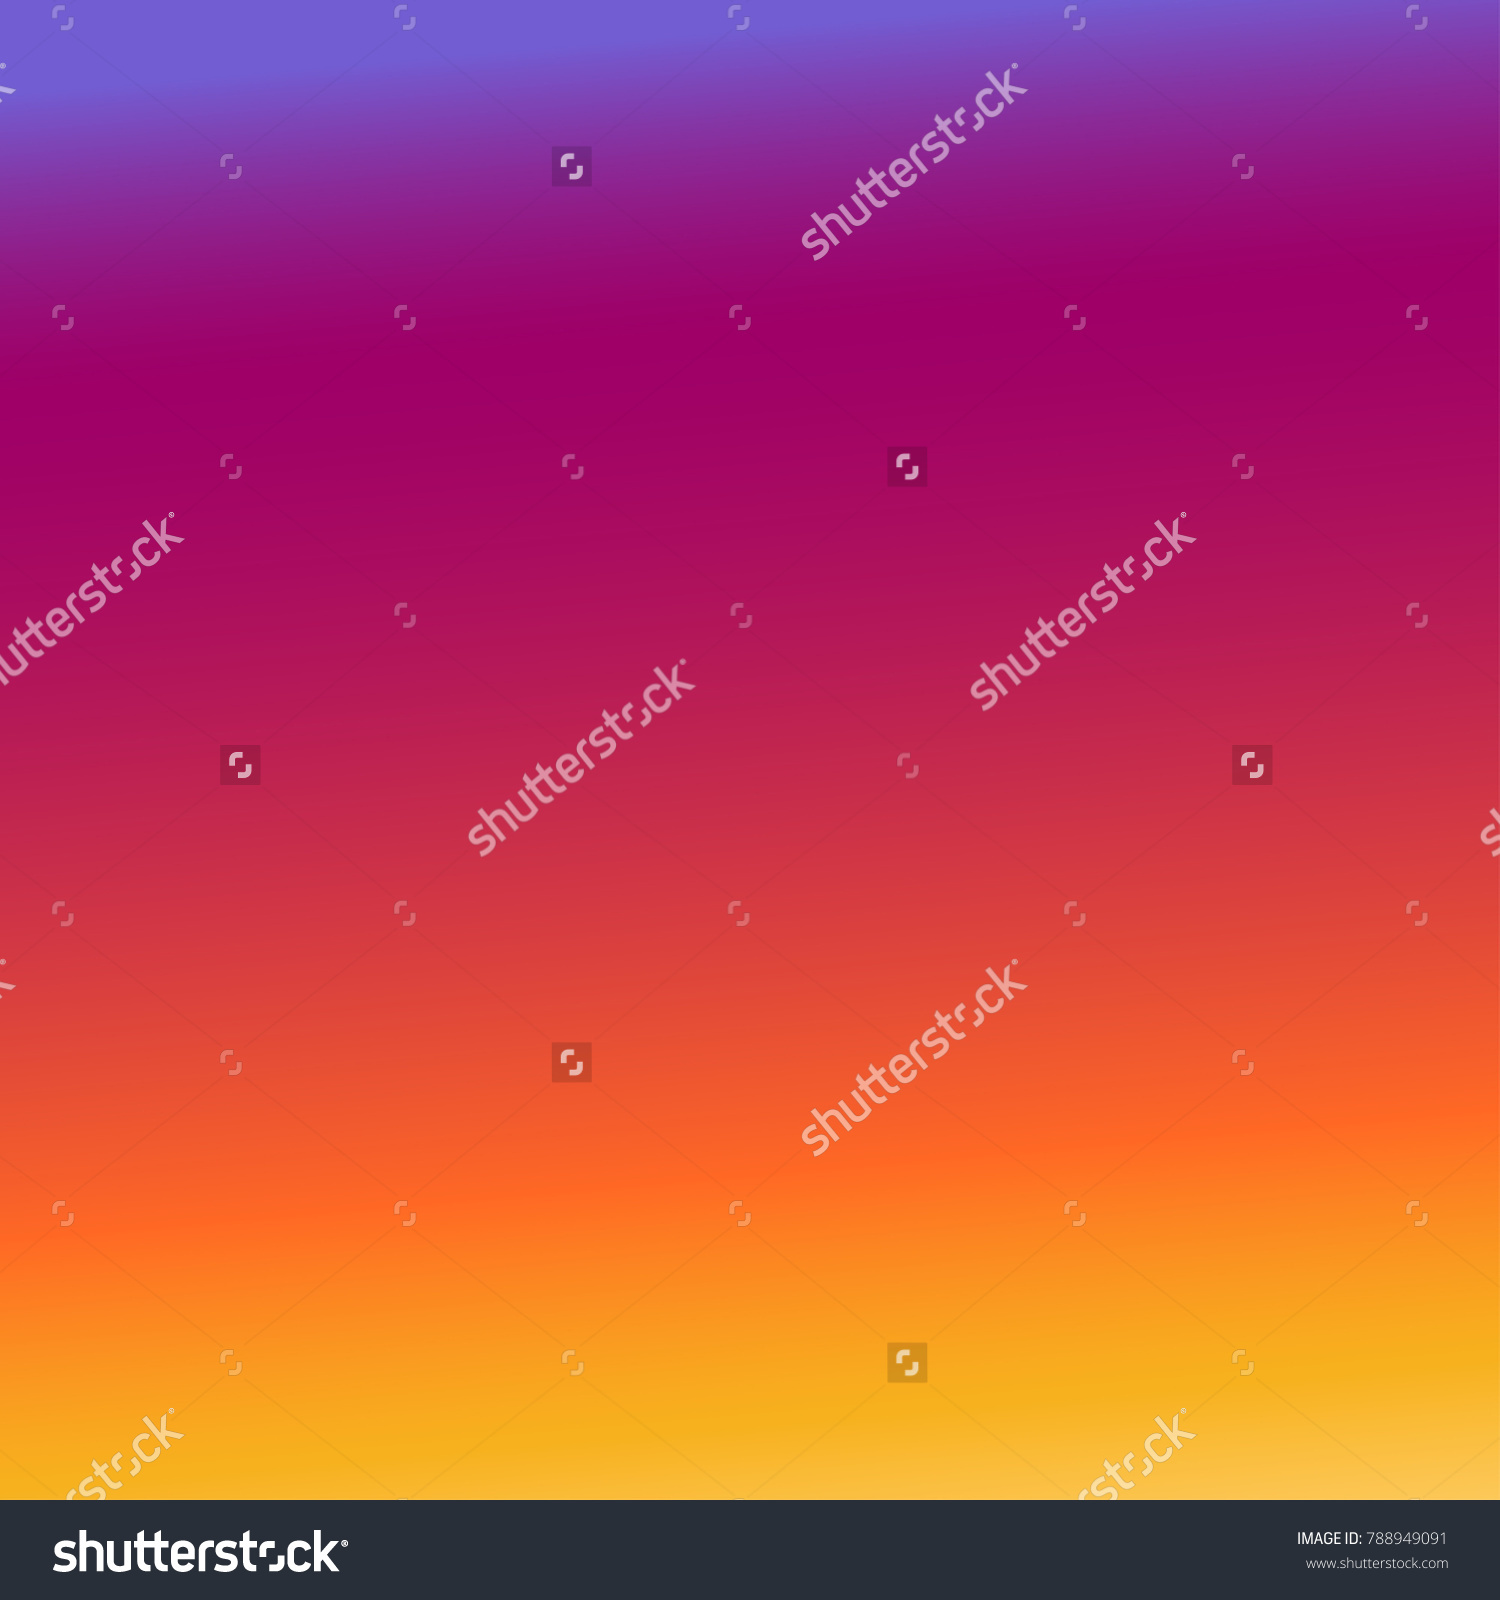 Instagram Background Gradient, Insta Vector Logo, Sign, Social Media, Colorful smooth color, Abstract wallpaper #788949091